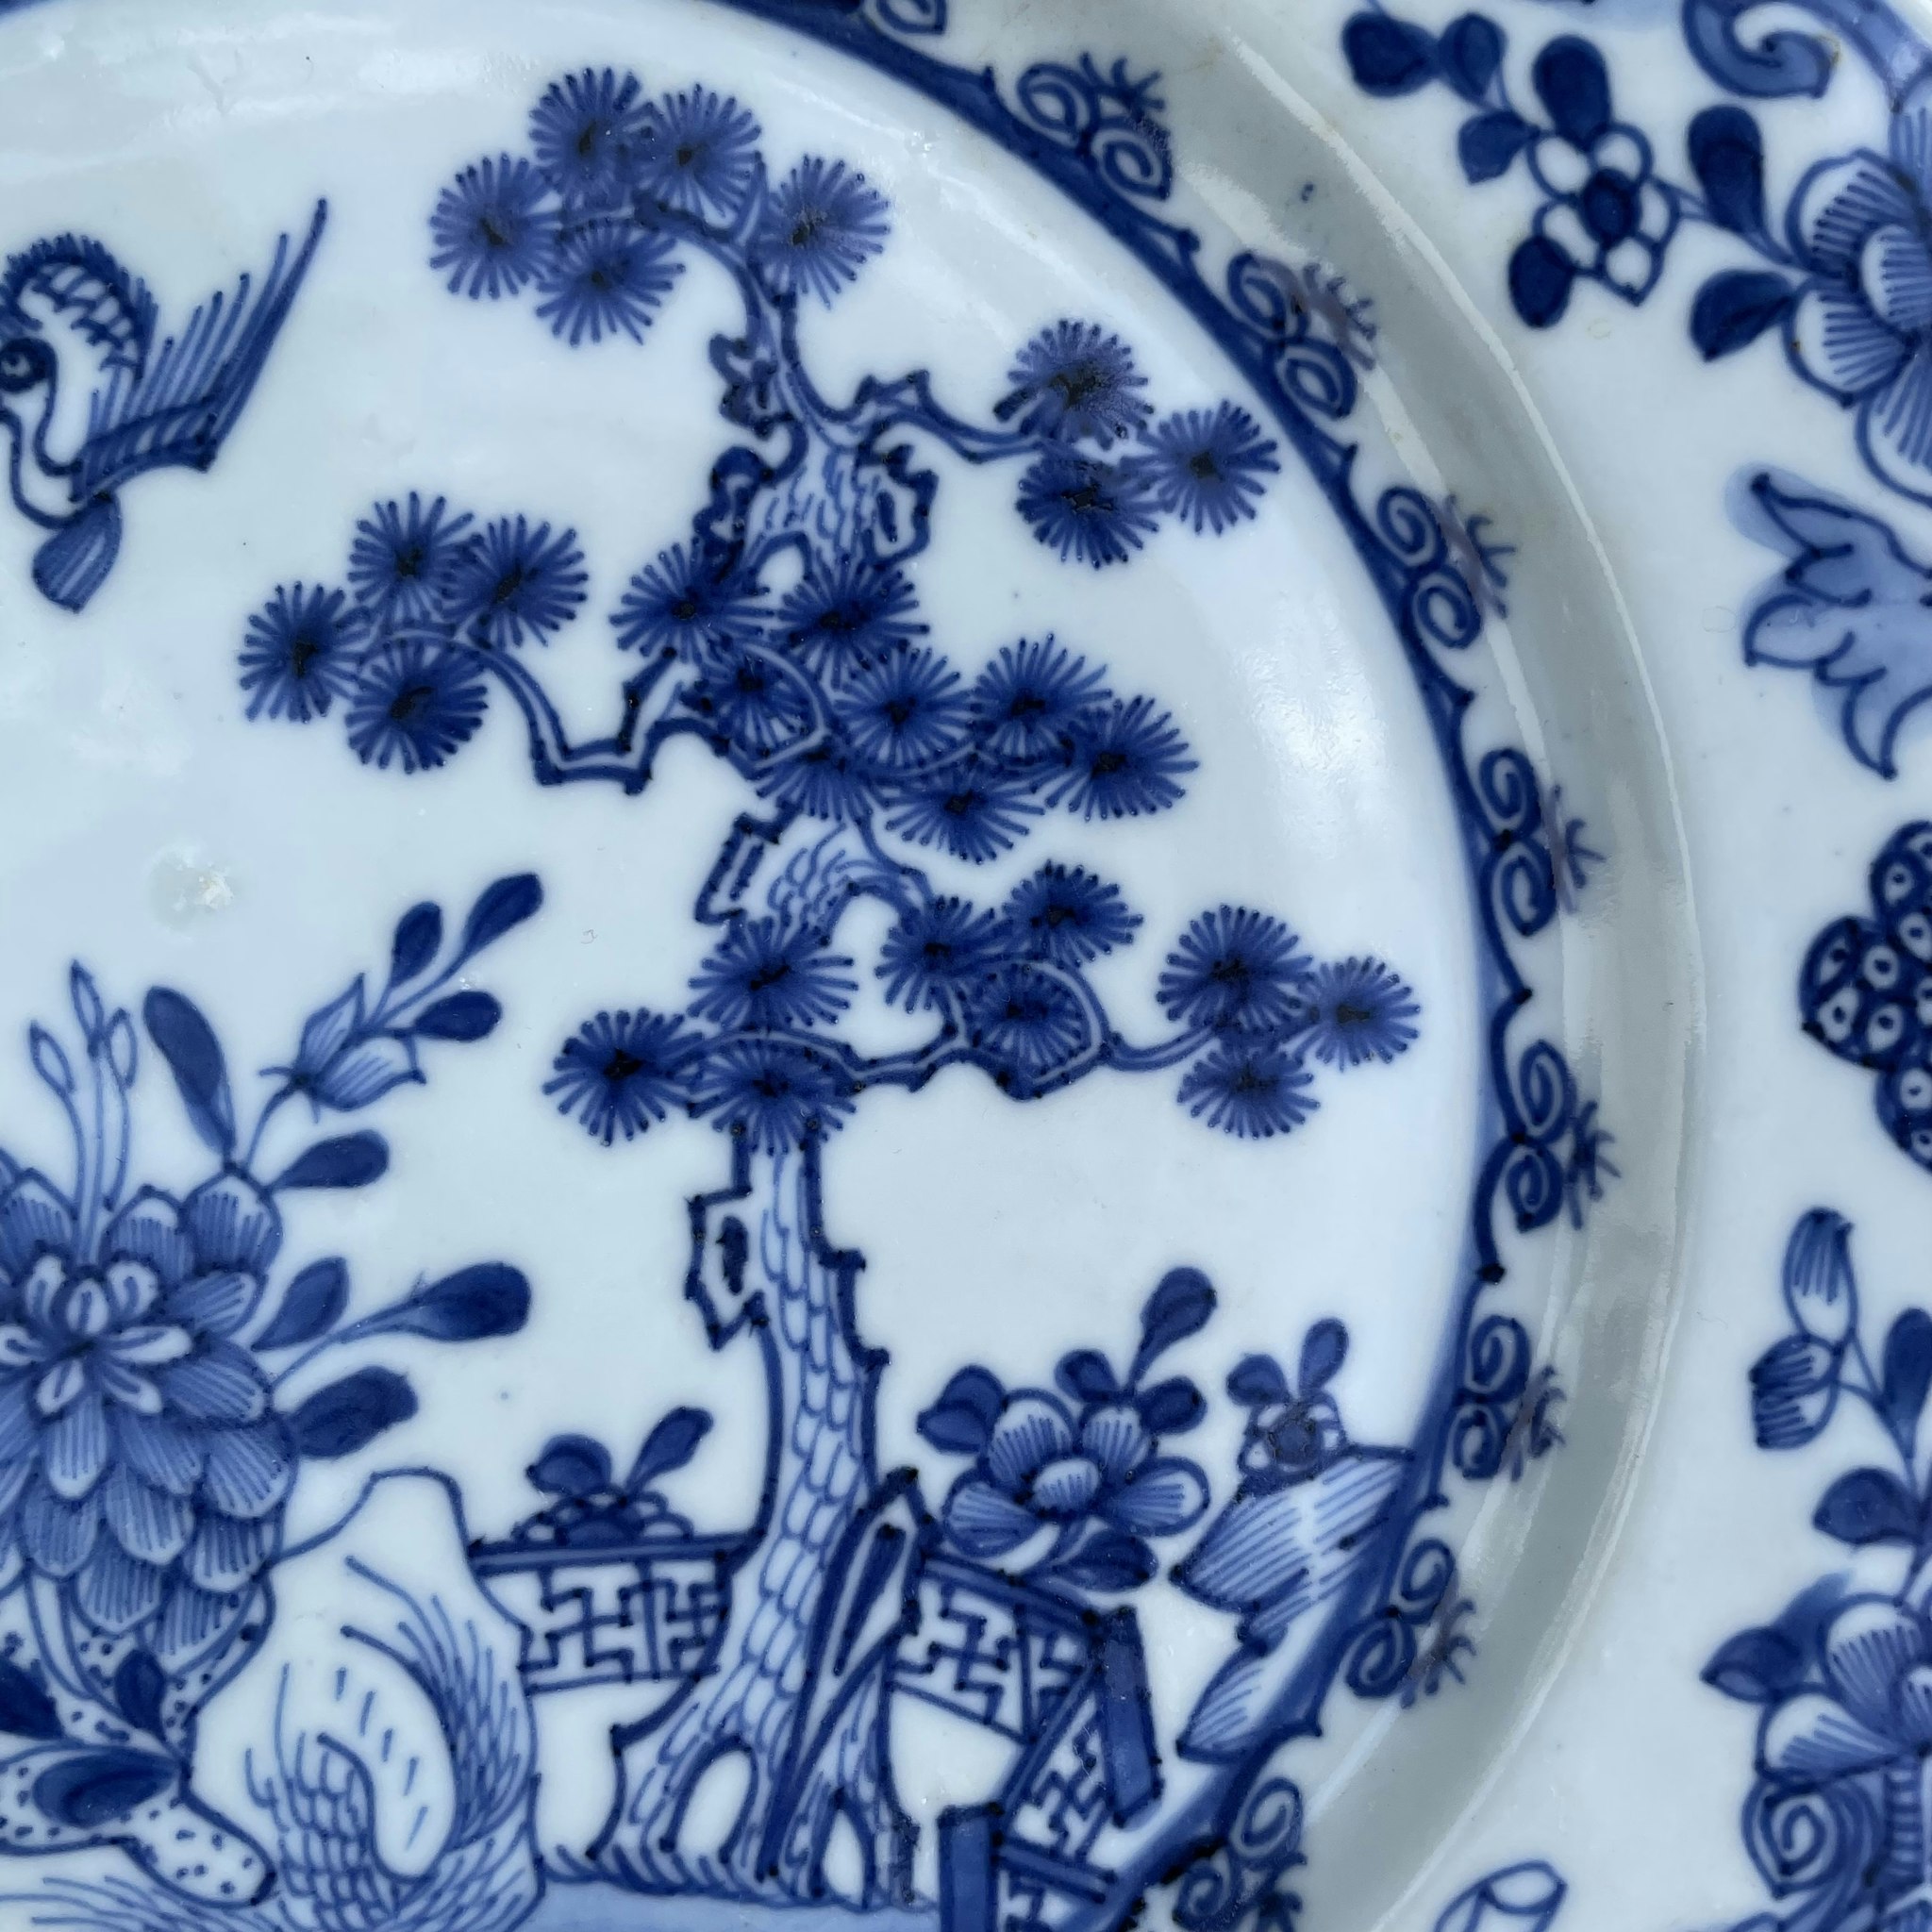 Chinese Antique blue and white porcelain plate 18th C Qianlong period #1619